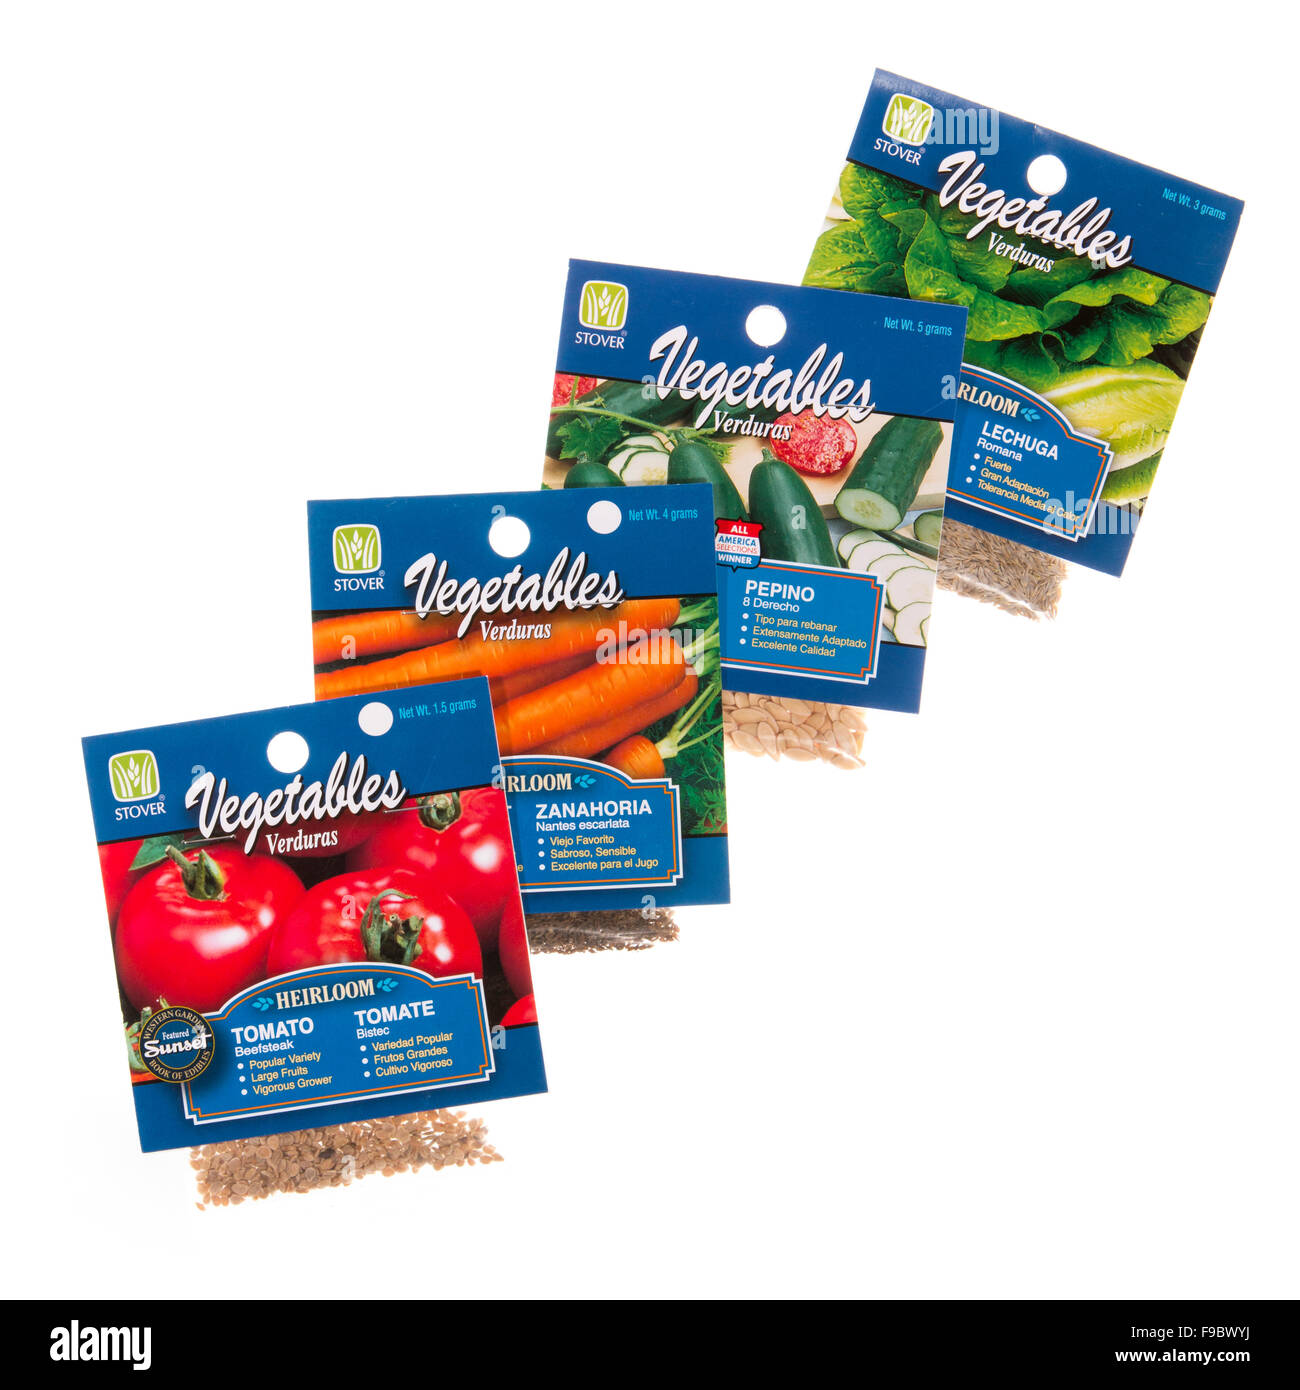 Vegetable garden seed packets with English and Spanish descriptions. Stock Photo